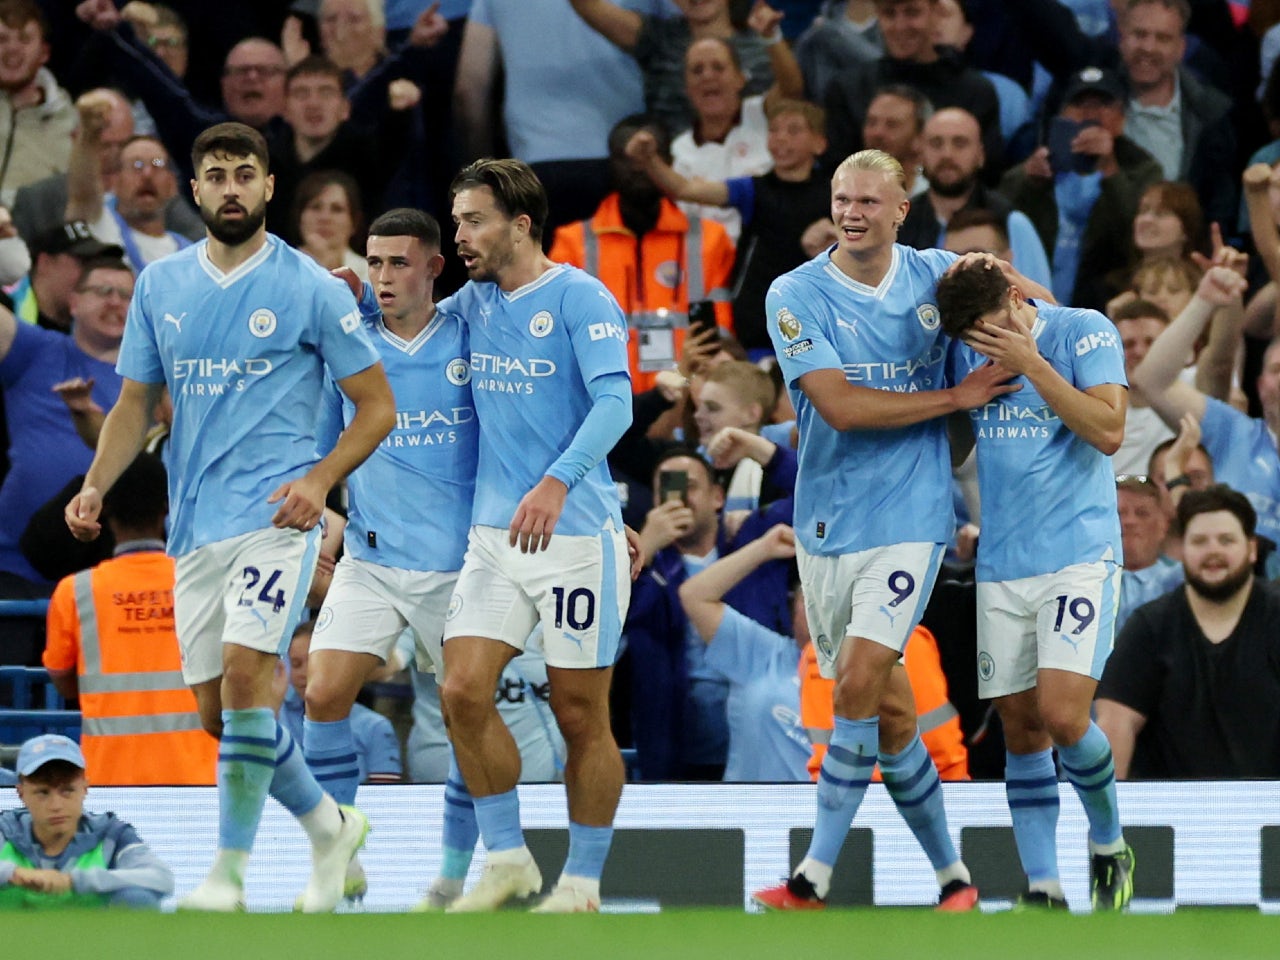 Phil Foden excels as Manchester City edge past Newcastle United